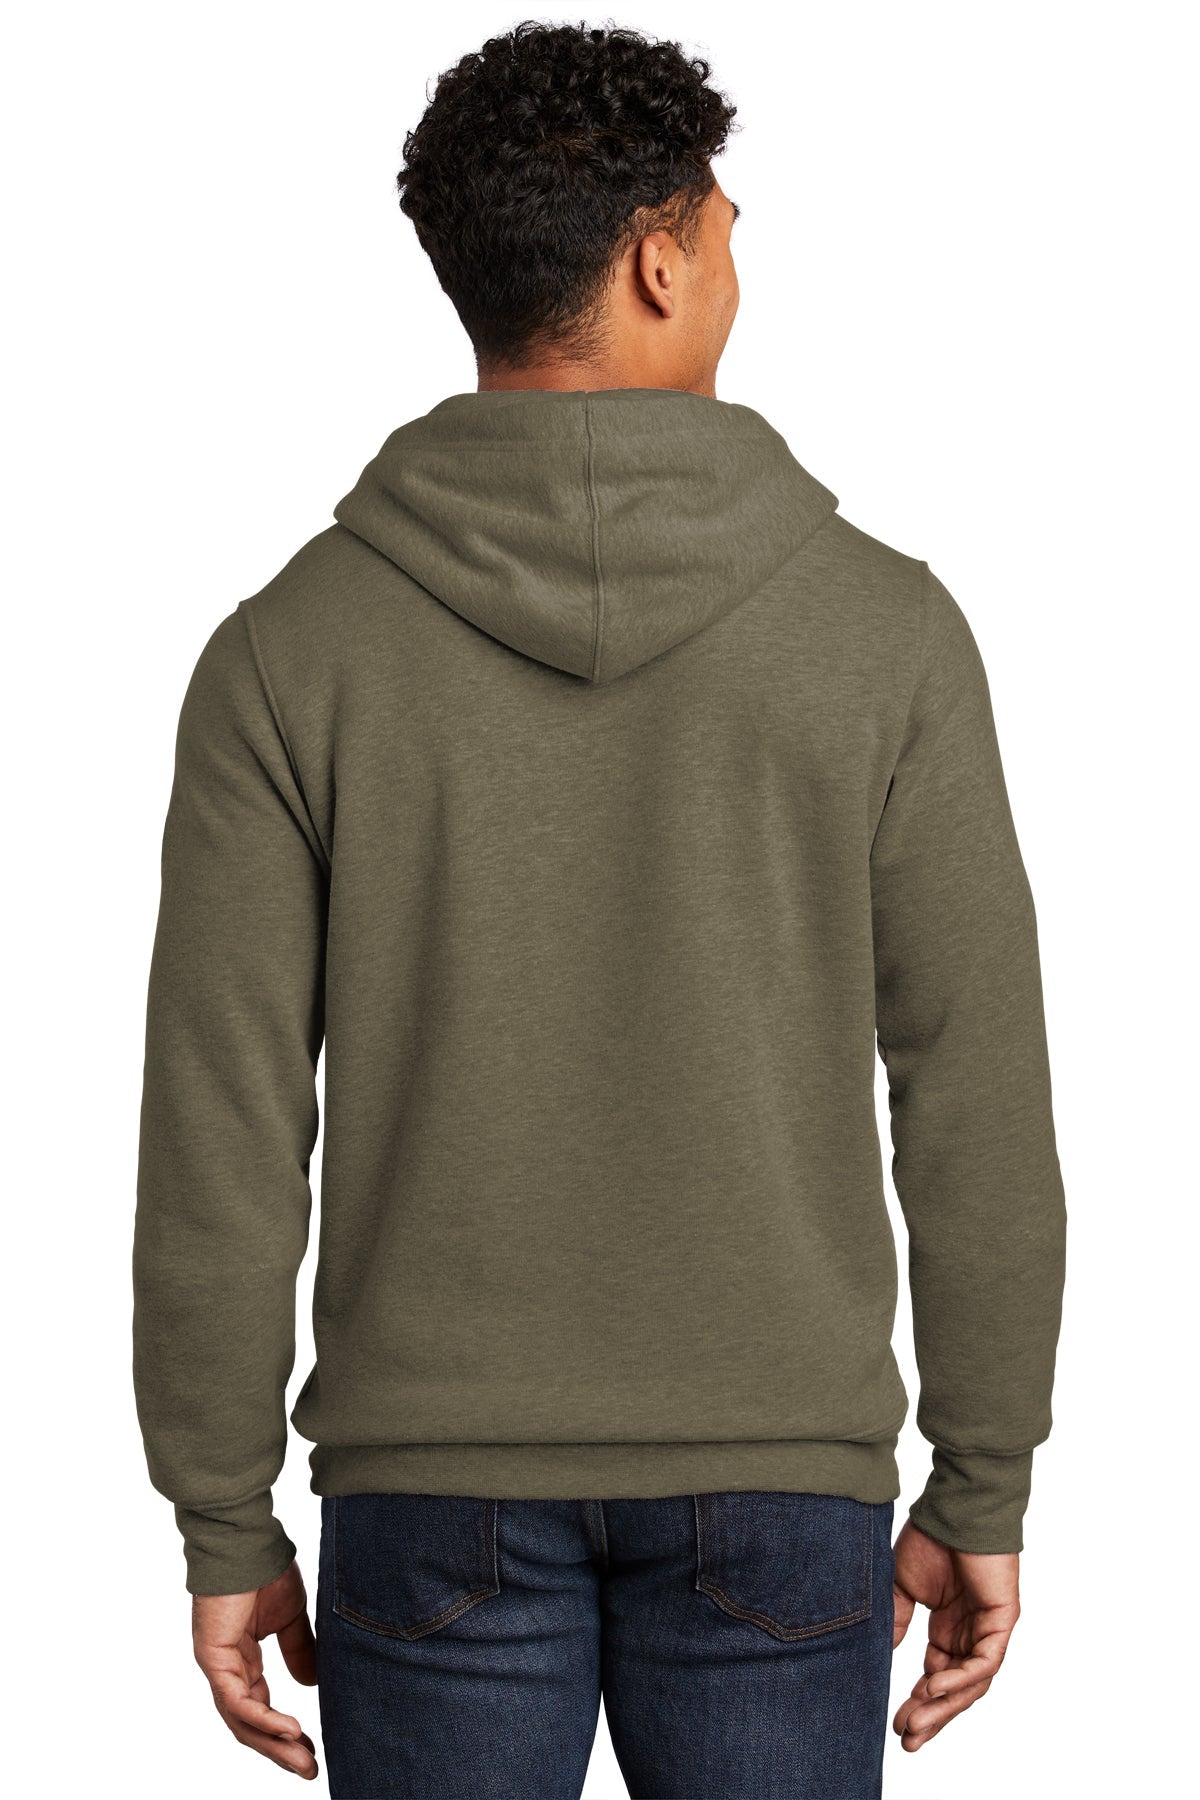 North Face Chest Logo Hoodie NF0A7V9B New Taupe Green Heather